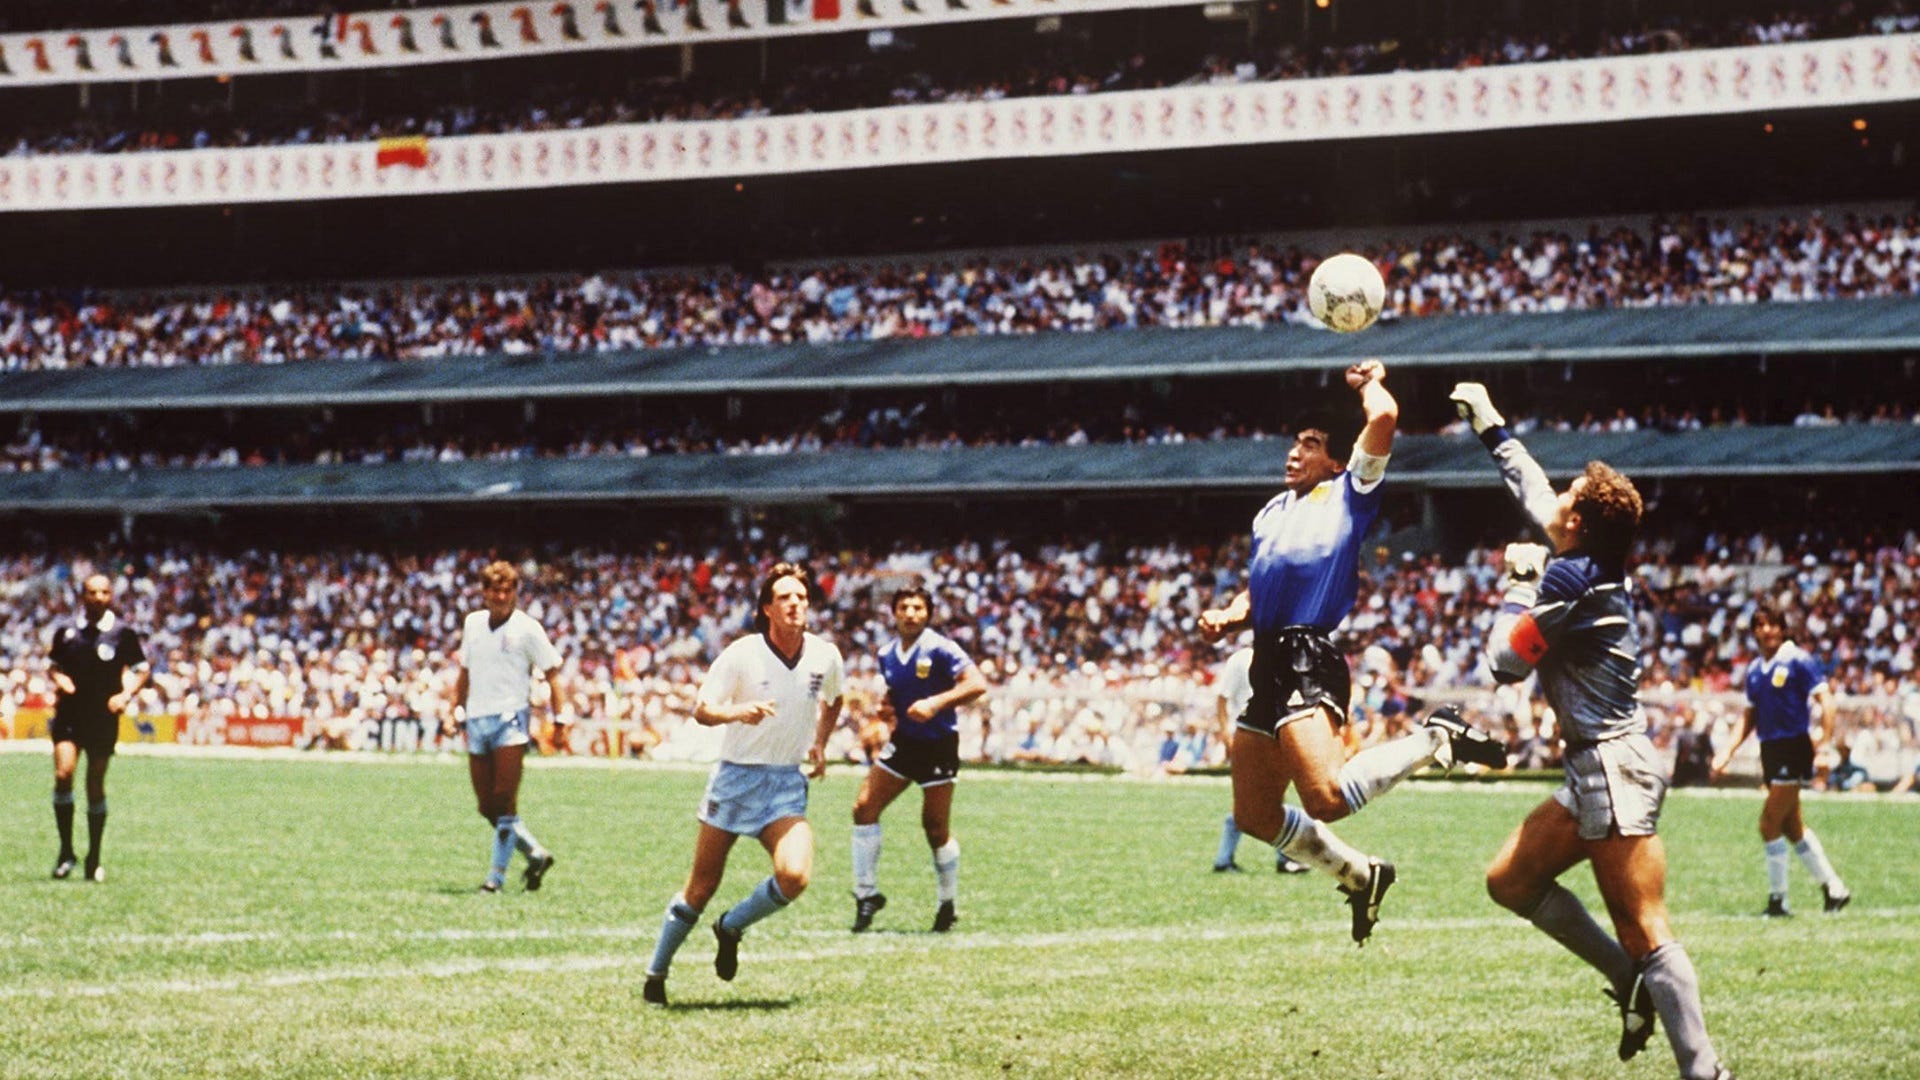 Diego Maradona & the Hand of God: The most infamous goal in World Cup history | Goal.com US